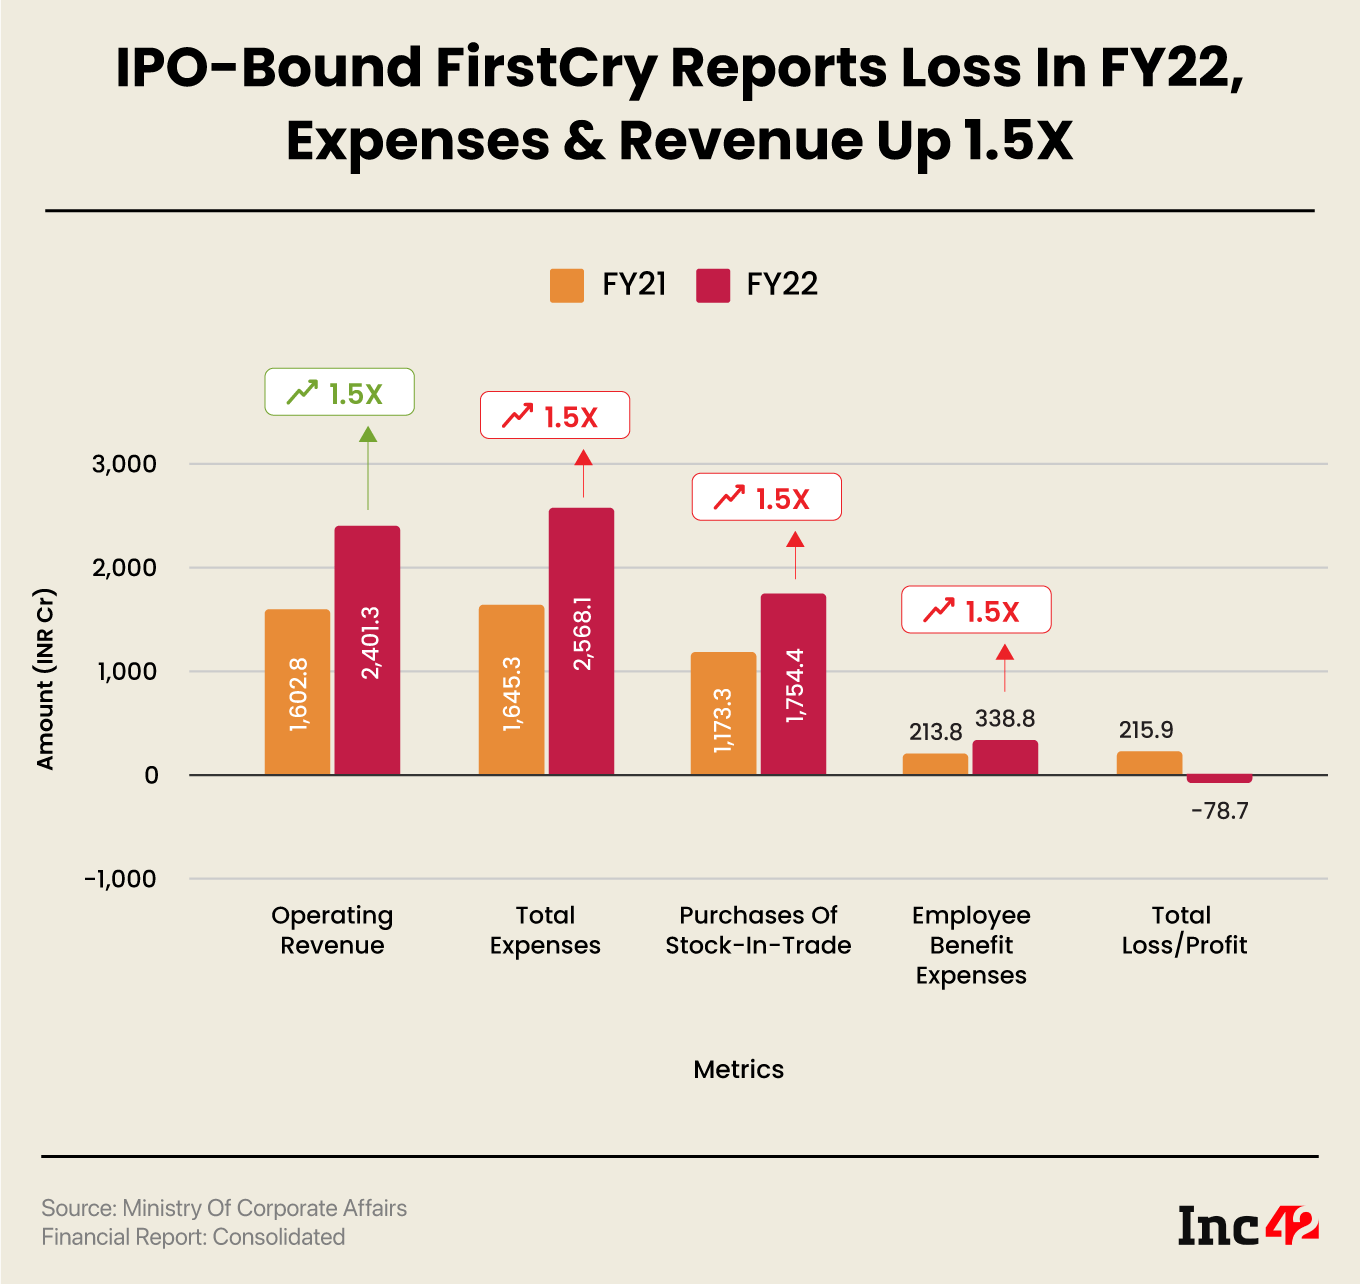 IPO-Bound FirstCry Reports Loss In FY22, Expenses & Revenue Up 1.5X